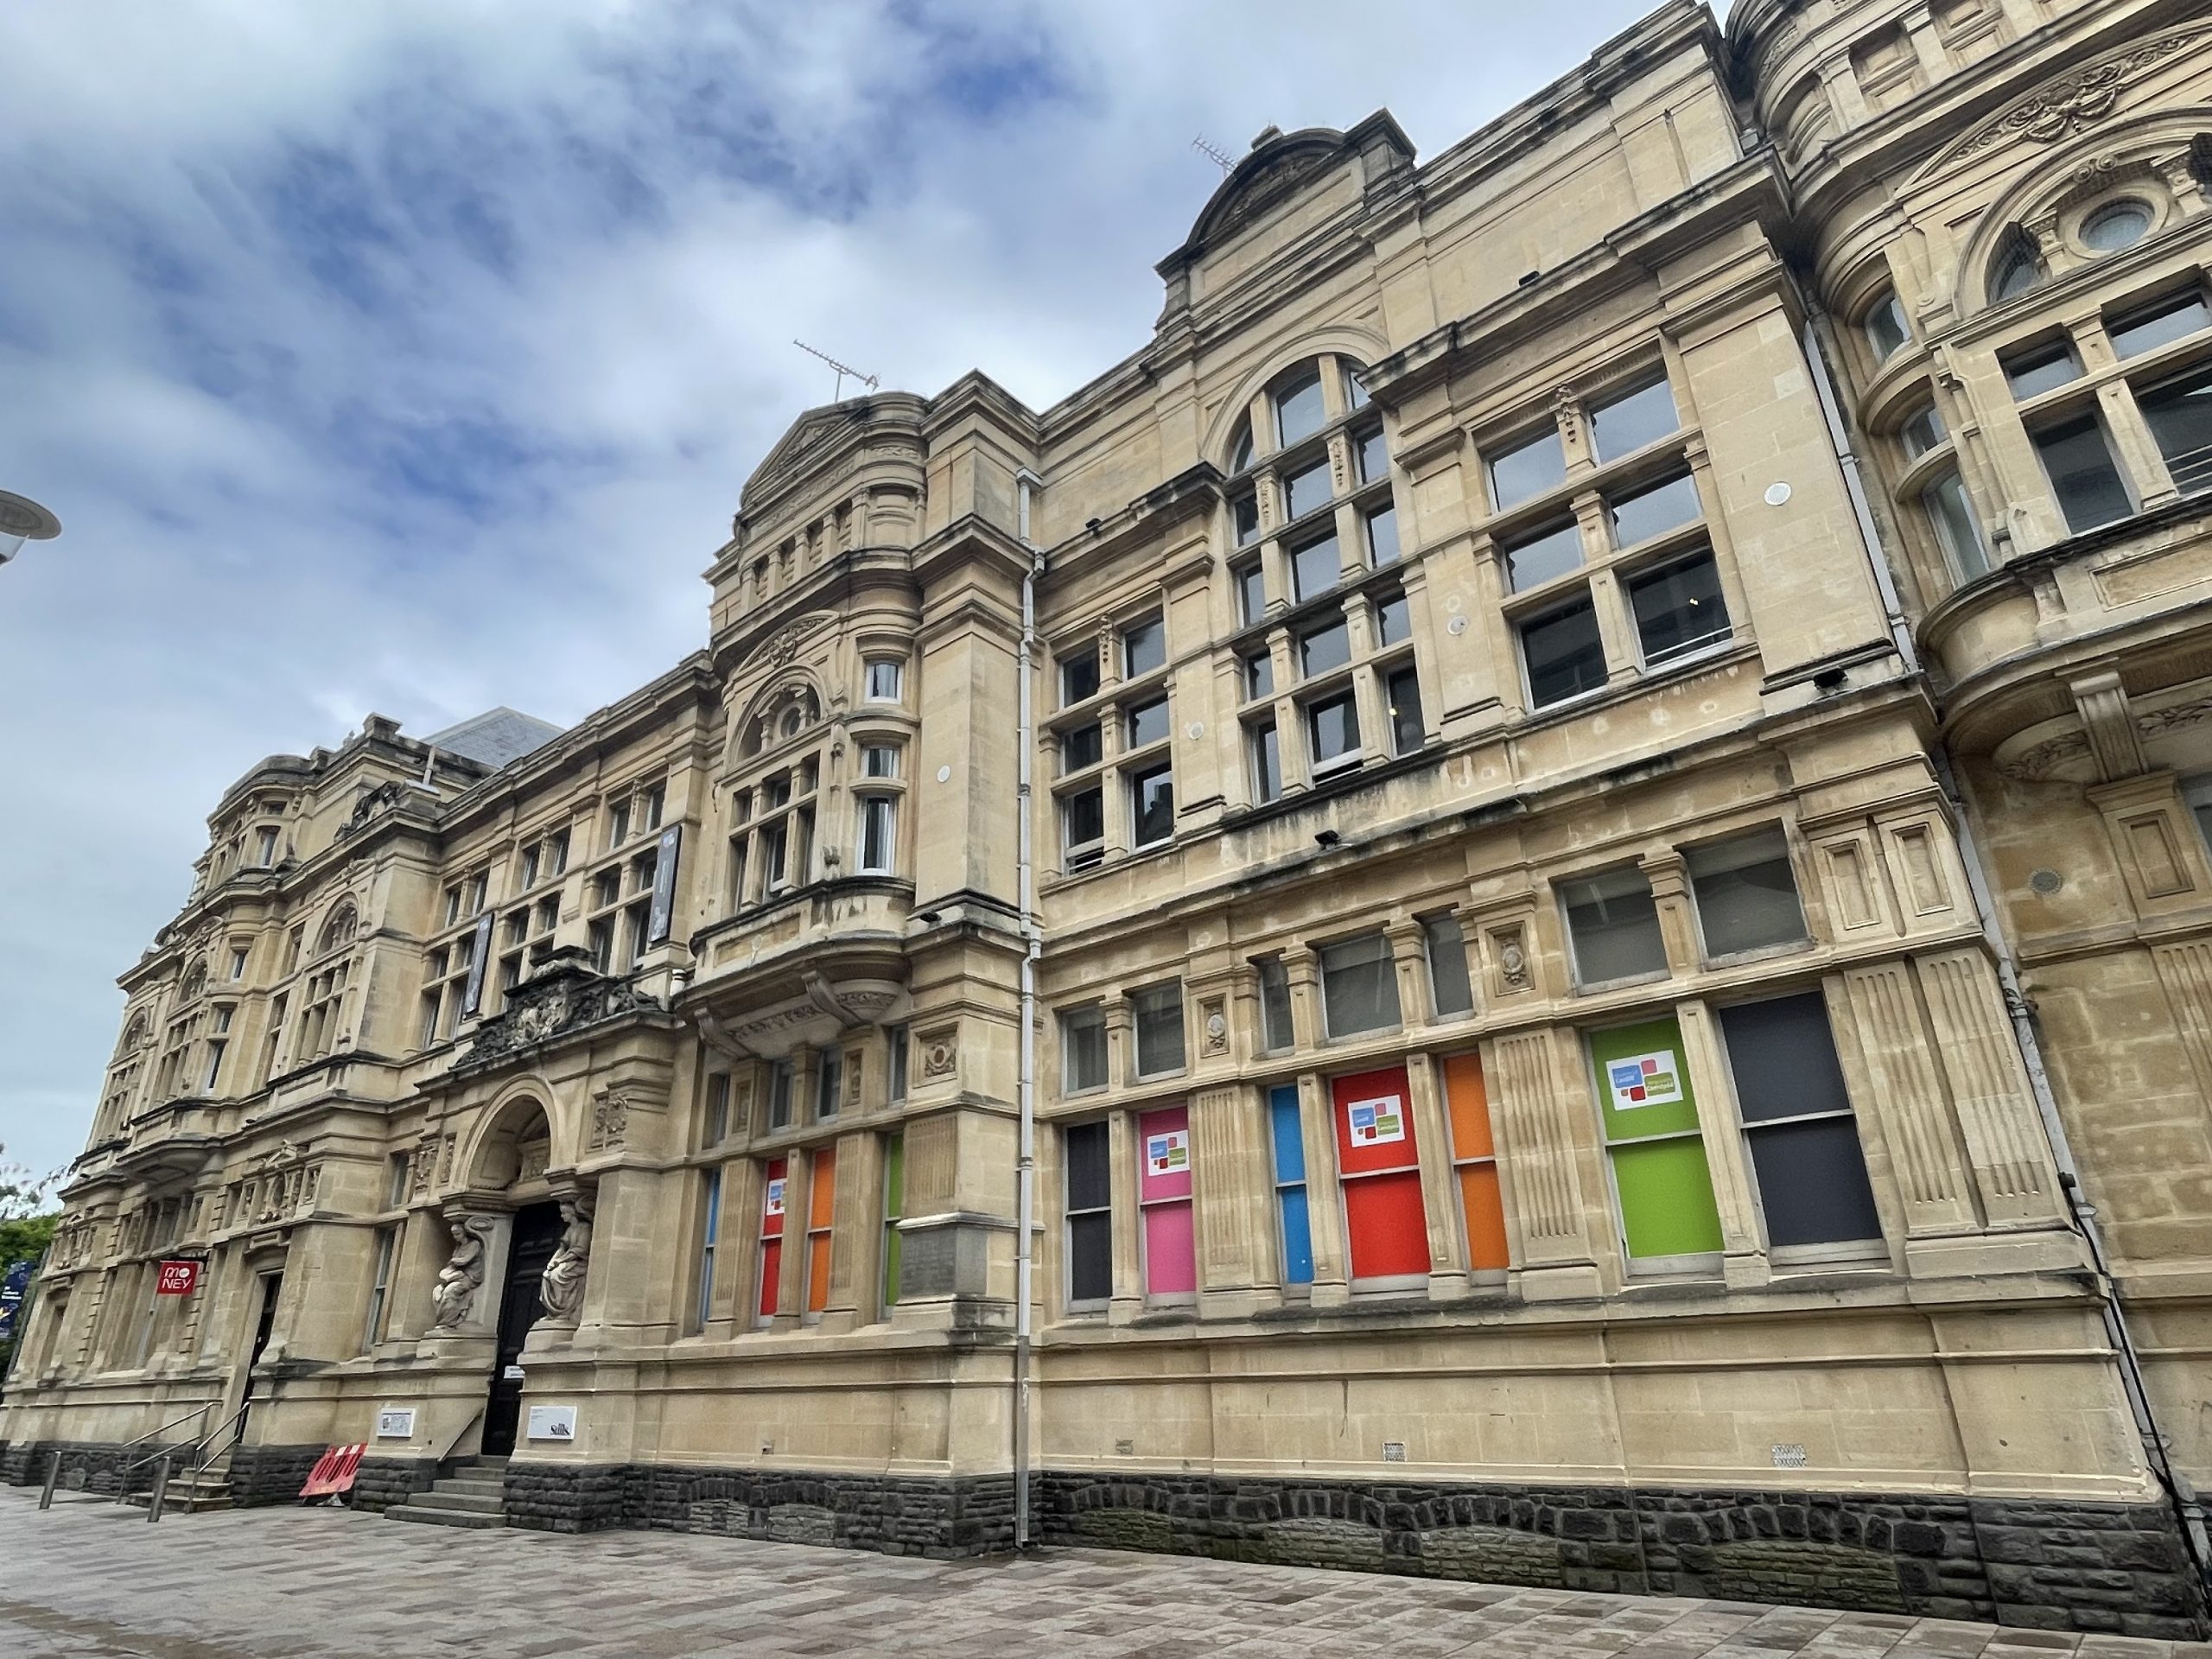 Fun Places to go in Cardiff (Part 2) - Student bloggers - Cardiff